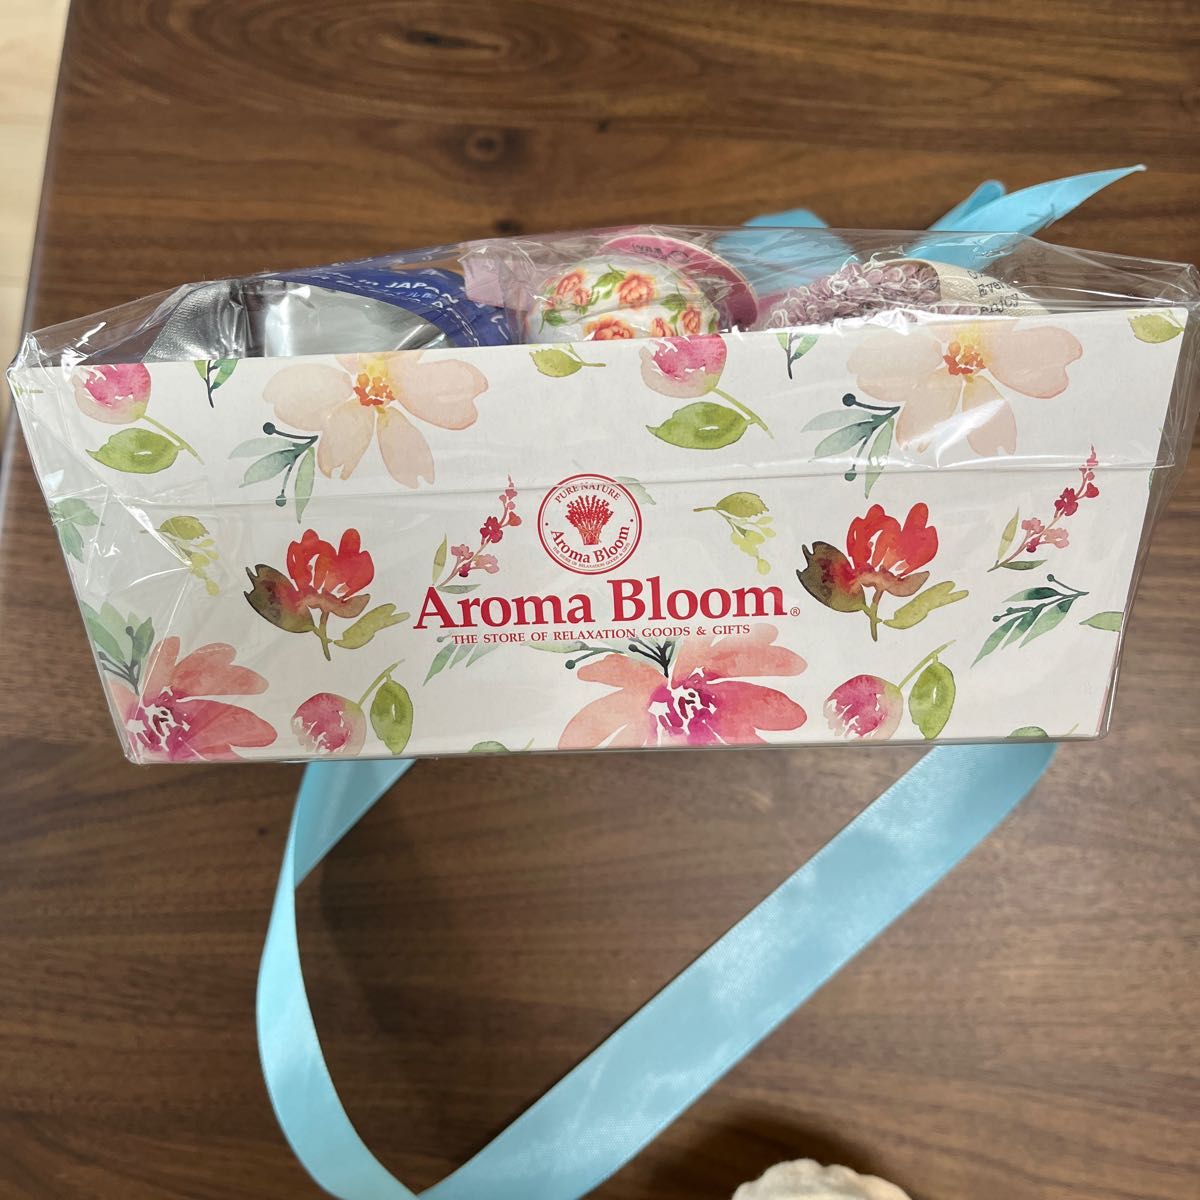 Aroma Bloomギフトセット